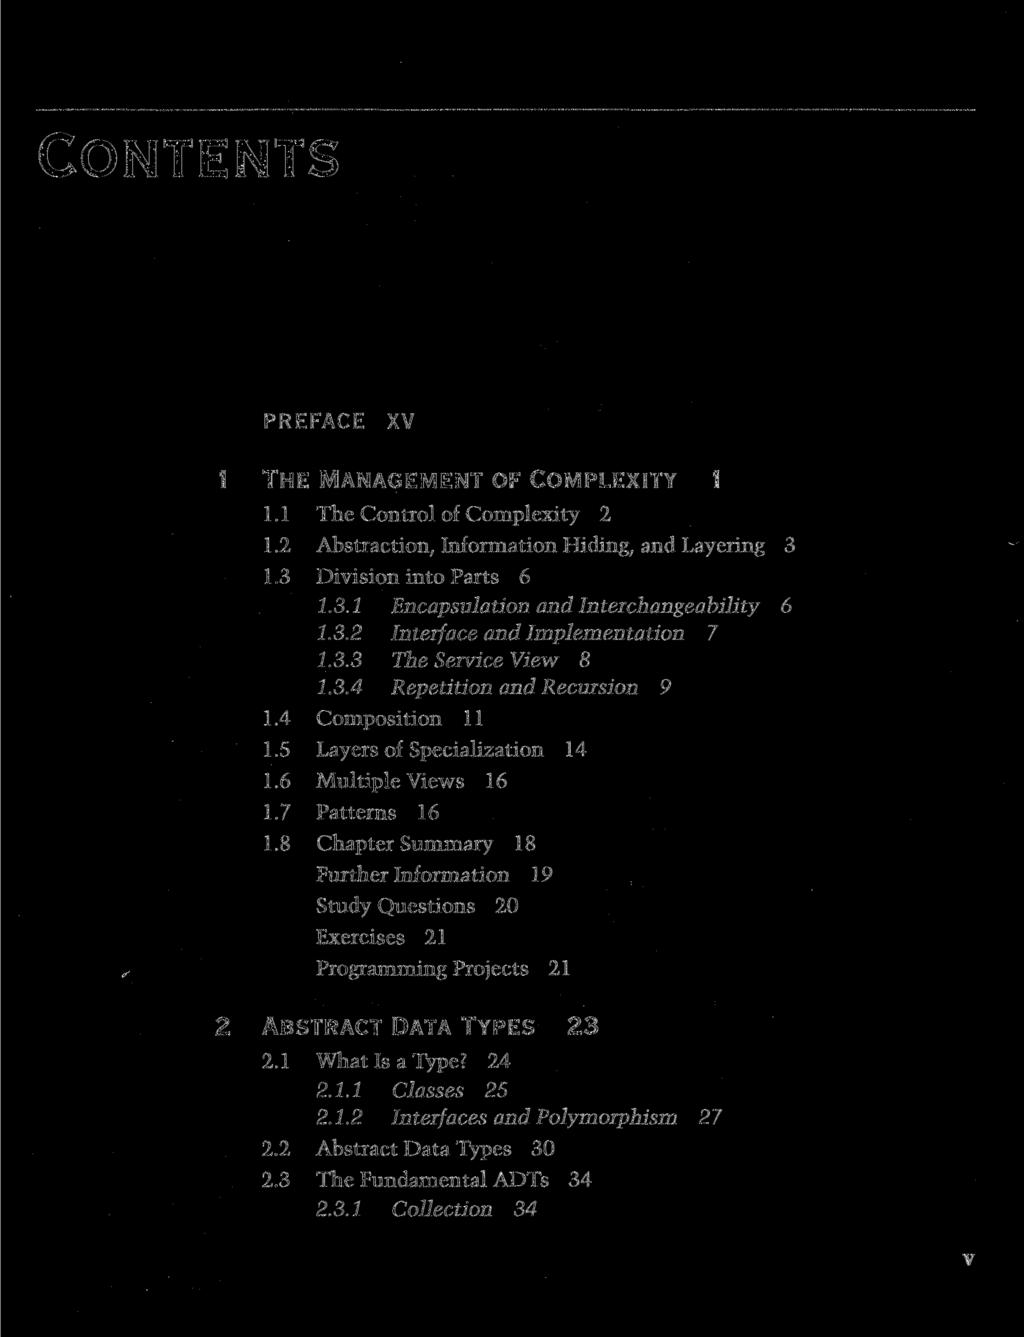 CONTENTS PREFACE XV THE MANAGEMENT OF COMPLEXITY 1 1.1 The Control of Complexity 2 1.2 Abstraction, Information Hiding, and Layering 3 1.3 Division into Parts 6 1.3.1 Encapsulation and Interchangeability 6 1.